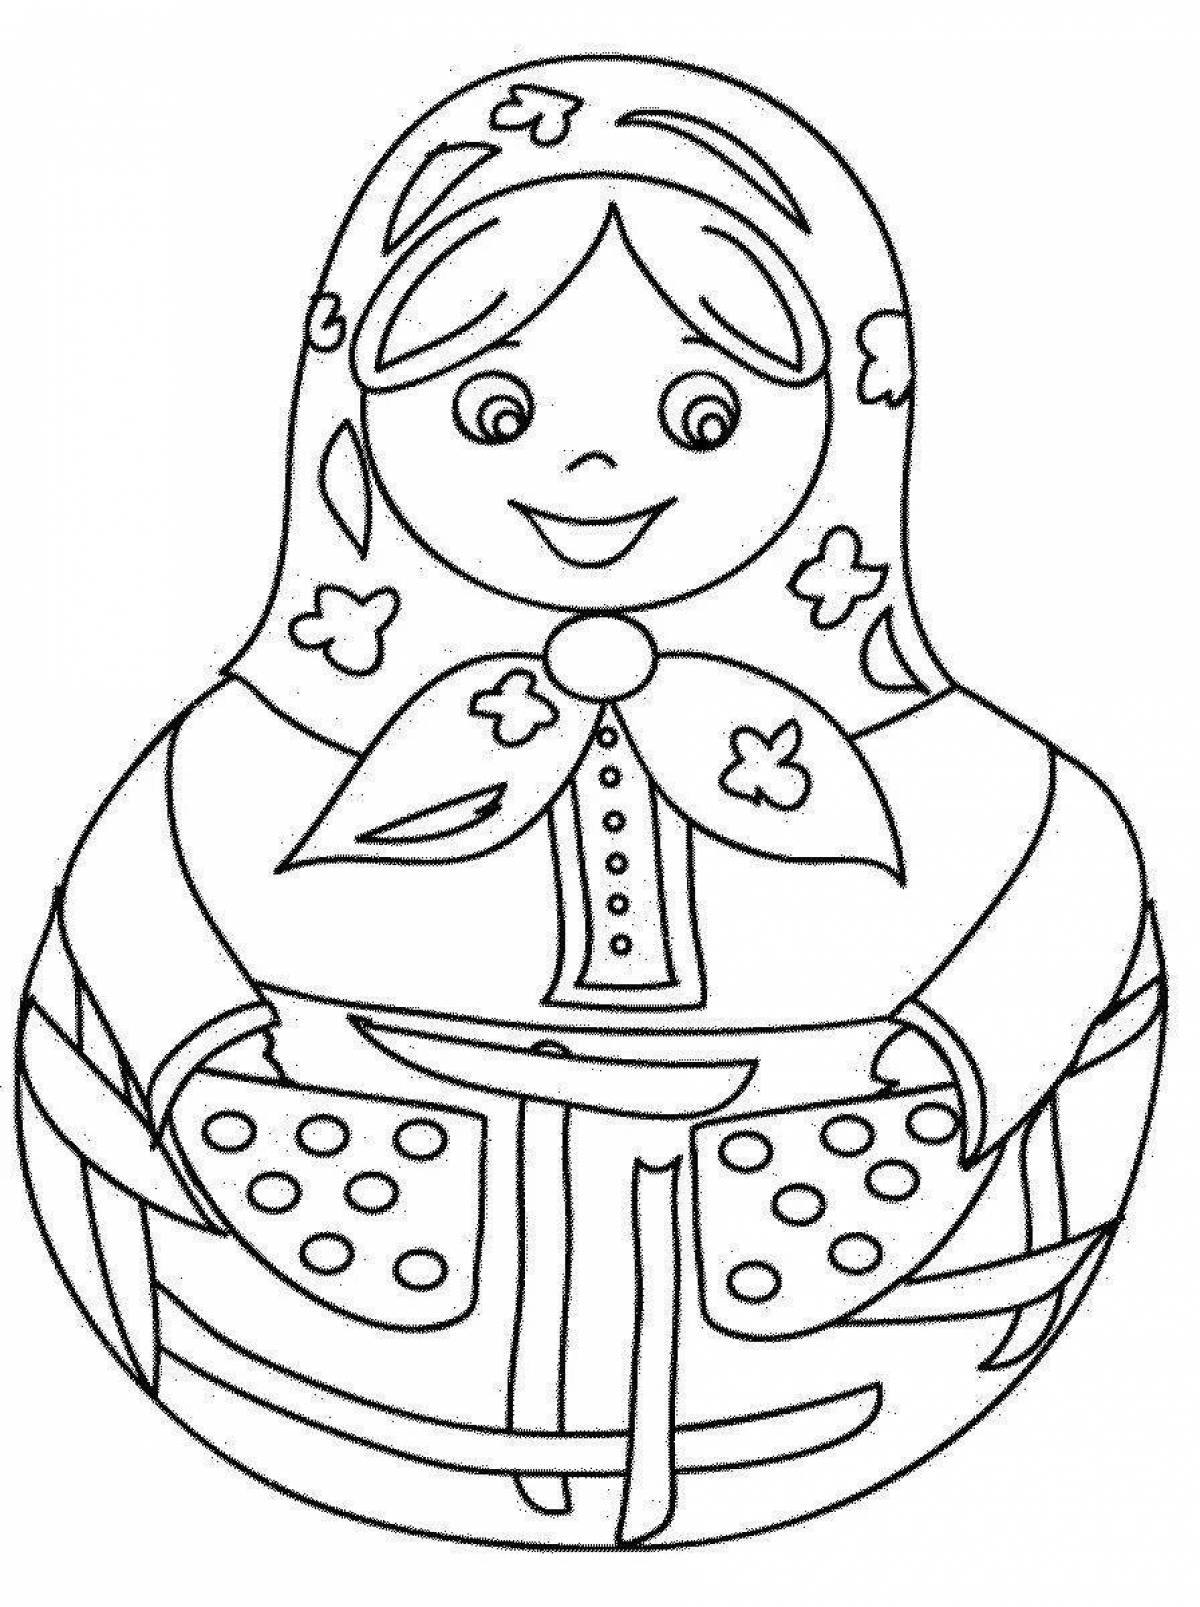 Coloring book magic nesting dolls for kids